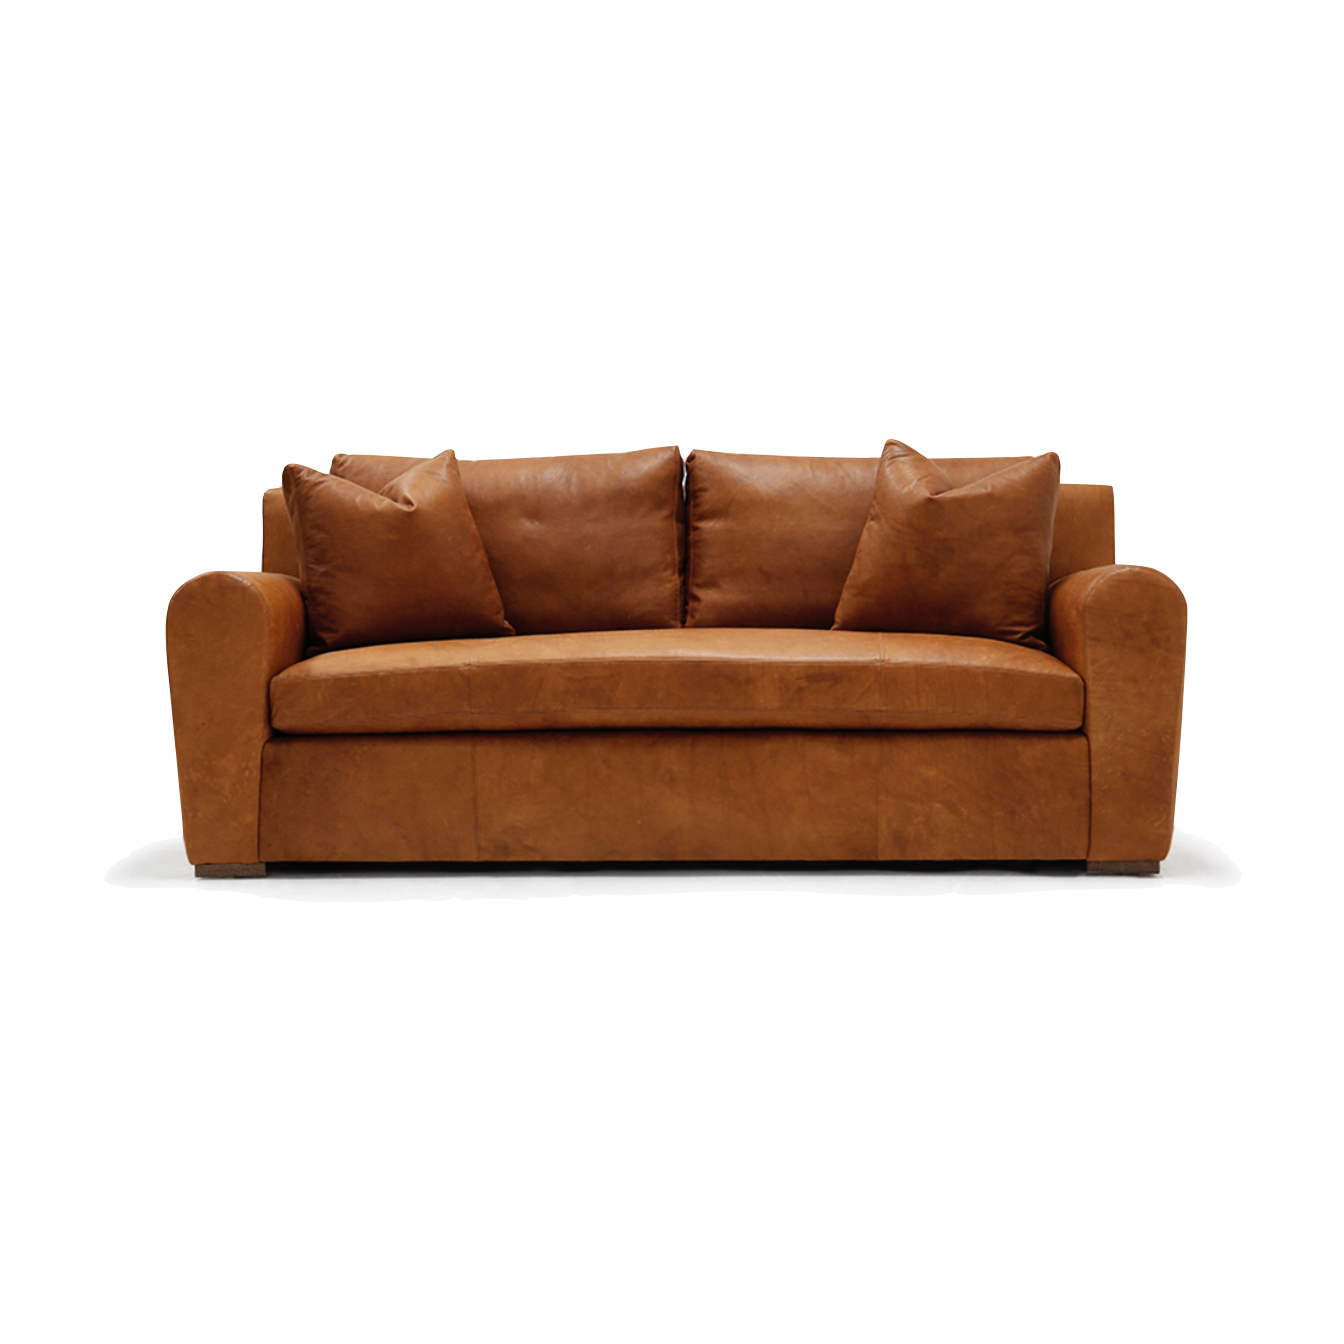 A timeless classic, the Gus Sofa Family by Verellen will be your favorite sofa to rewind in after a long day. This comes standard with the following:  spring down seat construction loose bench seat cushion boxed back pillows toss pillows with 2″ boxing Please specify leather or fabric for arm patch detail. Please specify leg finish. Available as a sectional.